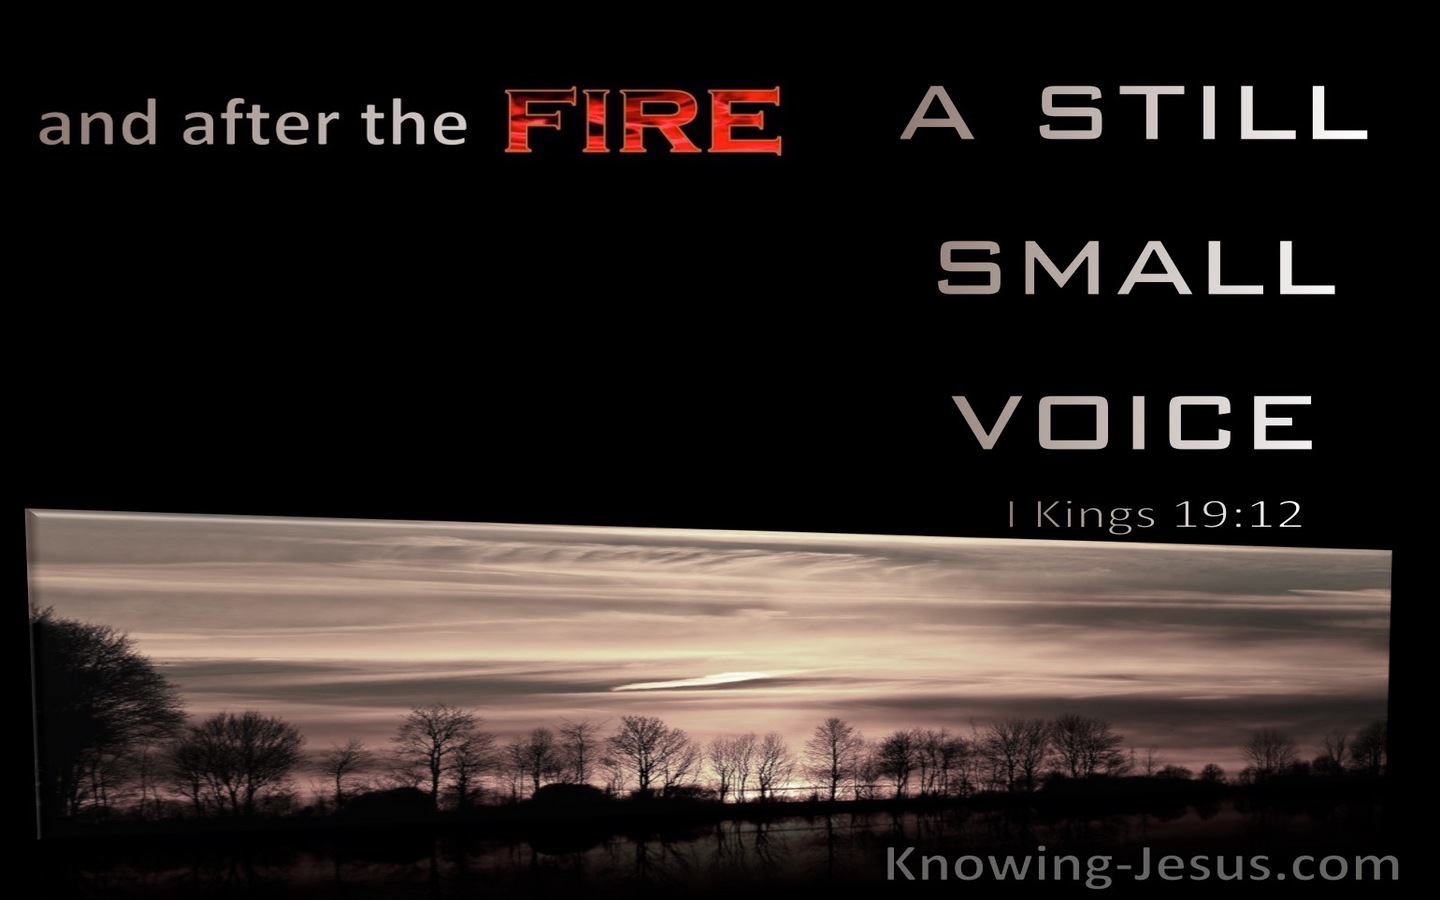 1 Kings 19:12 And After The Fire A Still Small Voice (black)